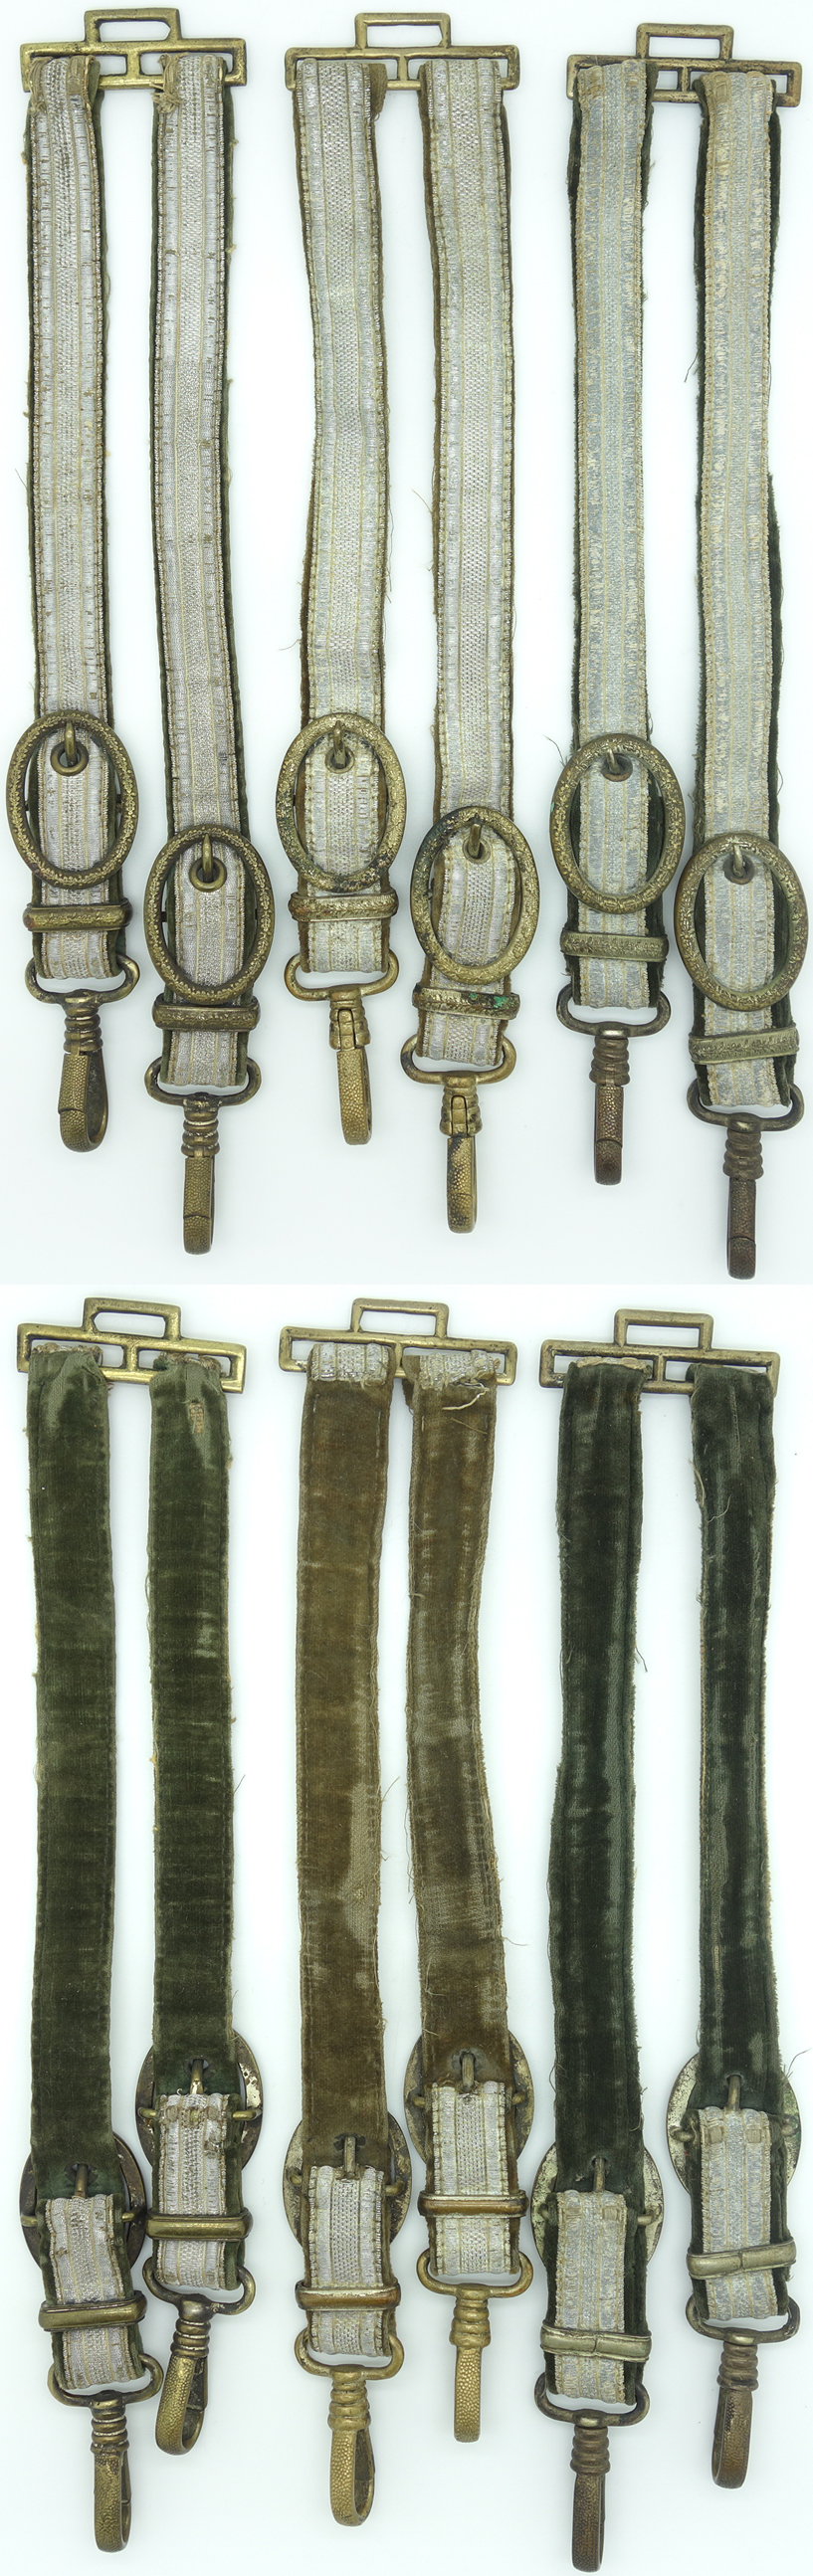 Early Issue Army Dagger Hangers. 